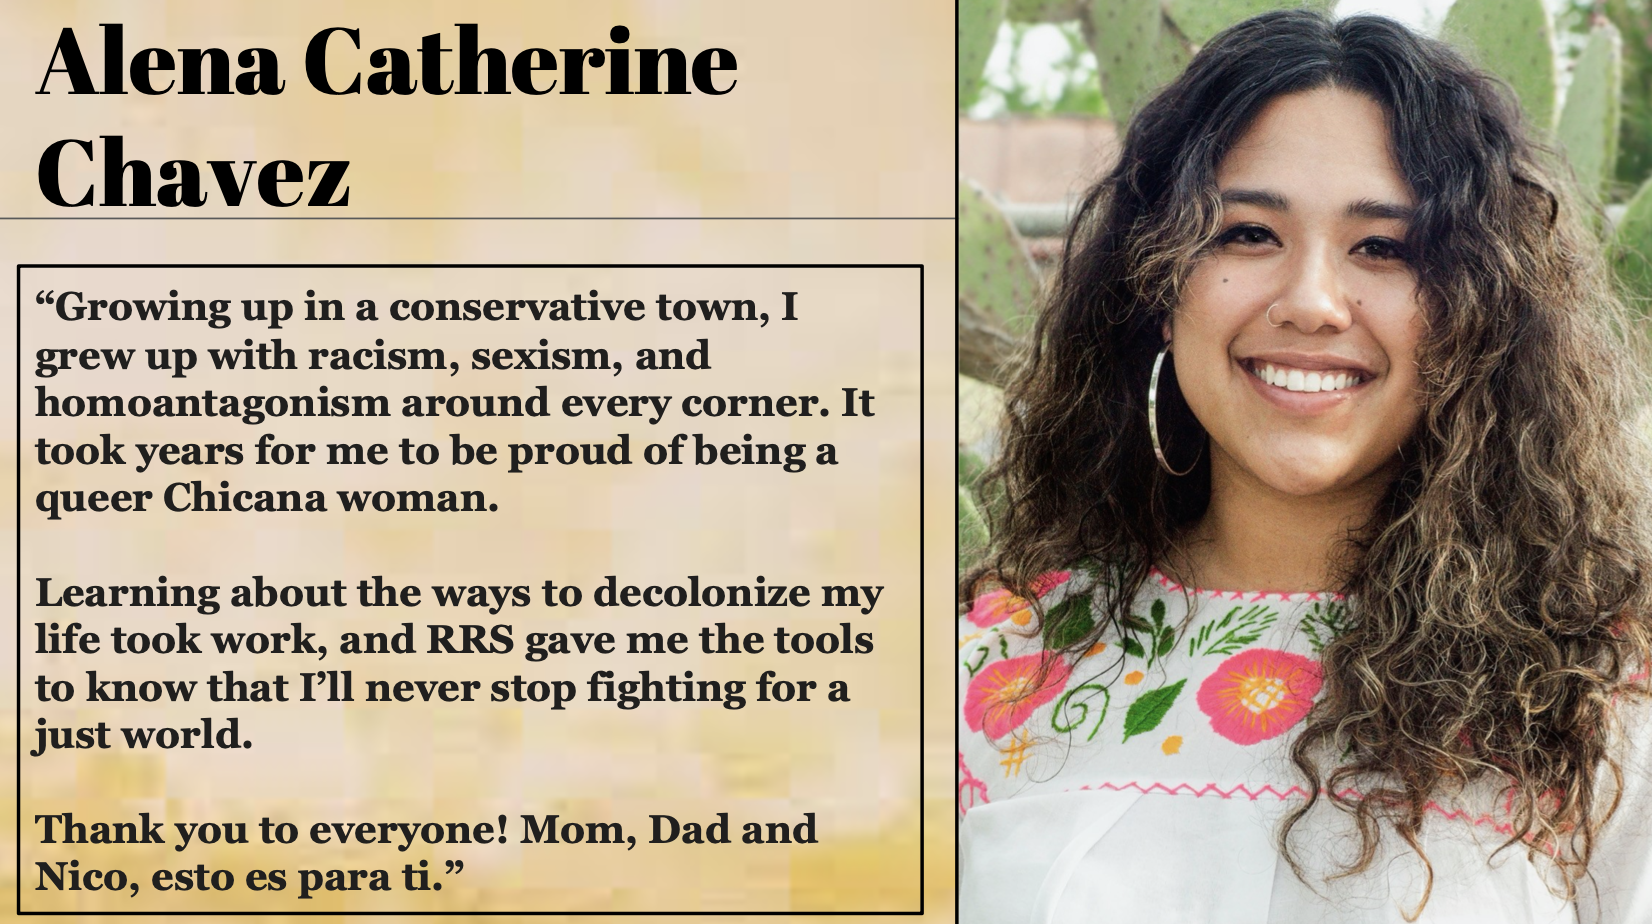 Alena Catherine Chavez got the tools from RRS to know that she will never stop fighting for a just world. 